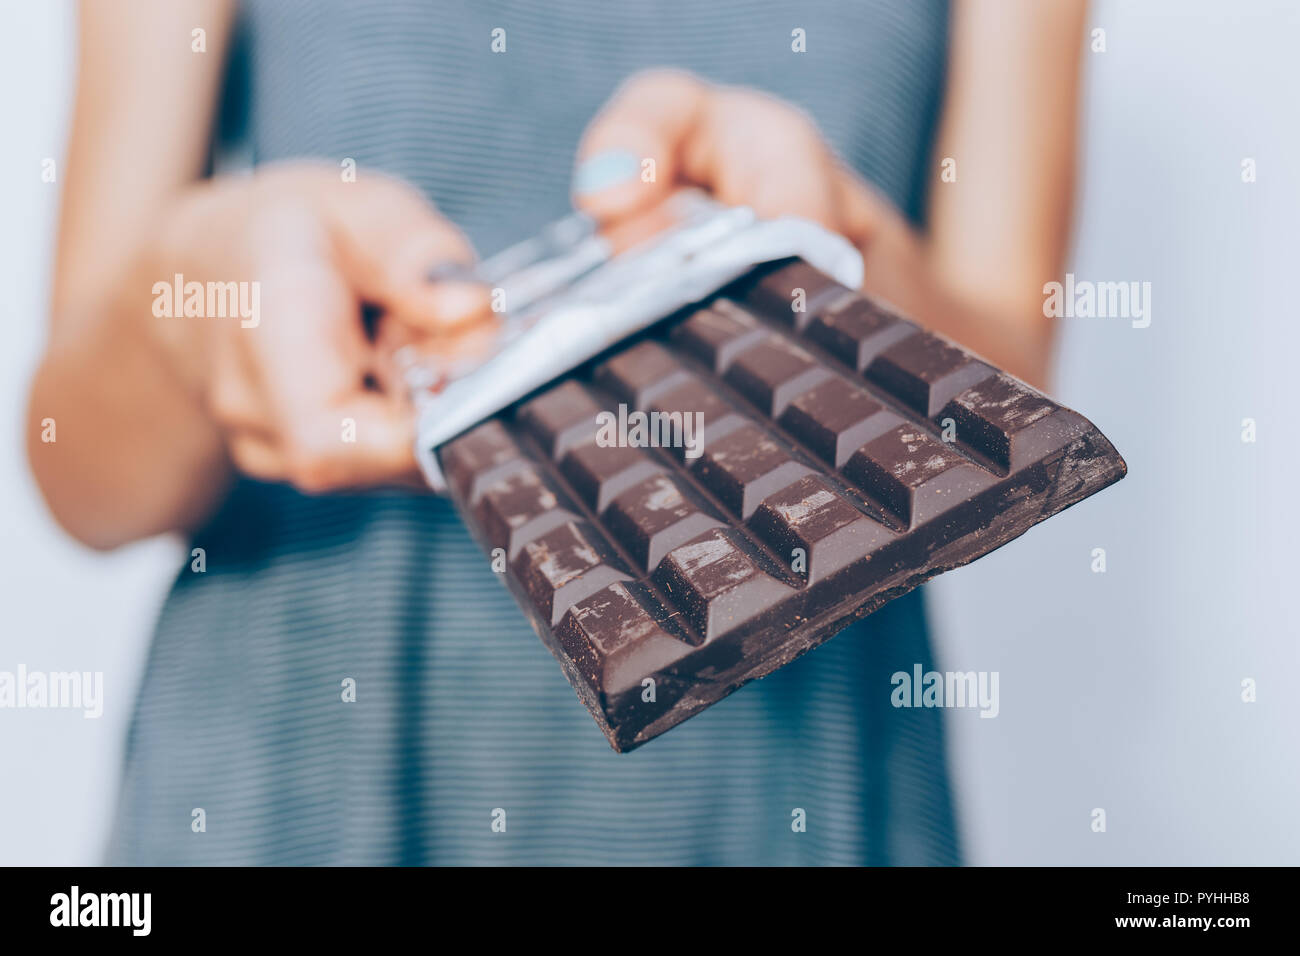 Female's hands holding unwrapped dark chocolate bar, close-up. Unrecognizable young woman standing and offering cocoa dessert. Stock Photo